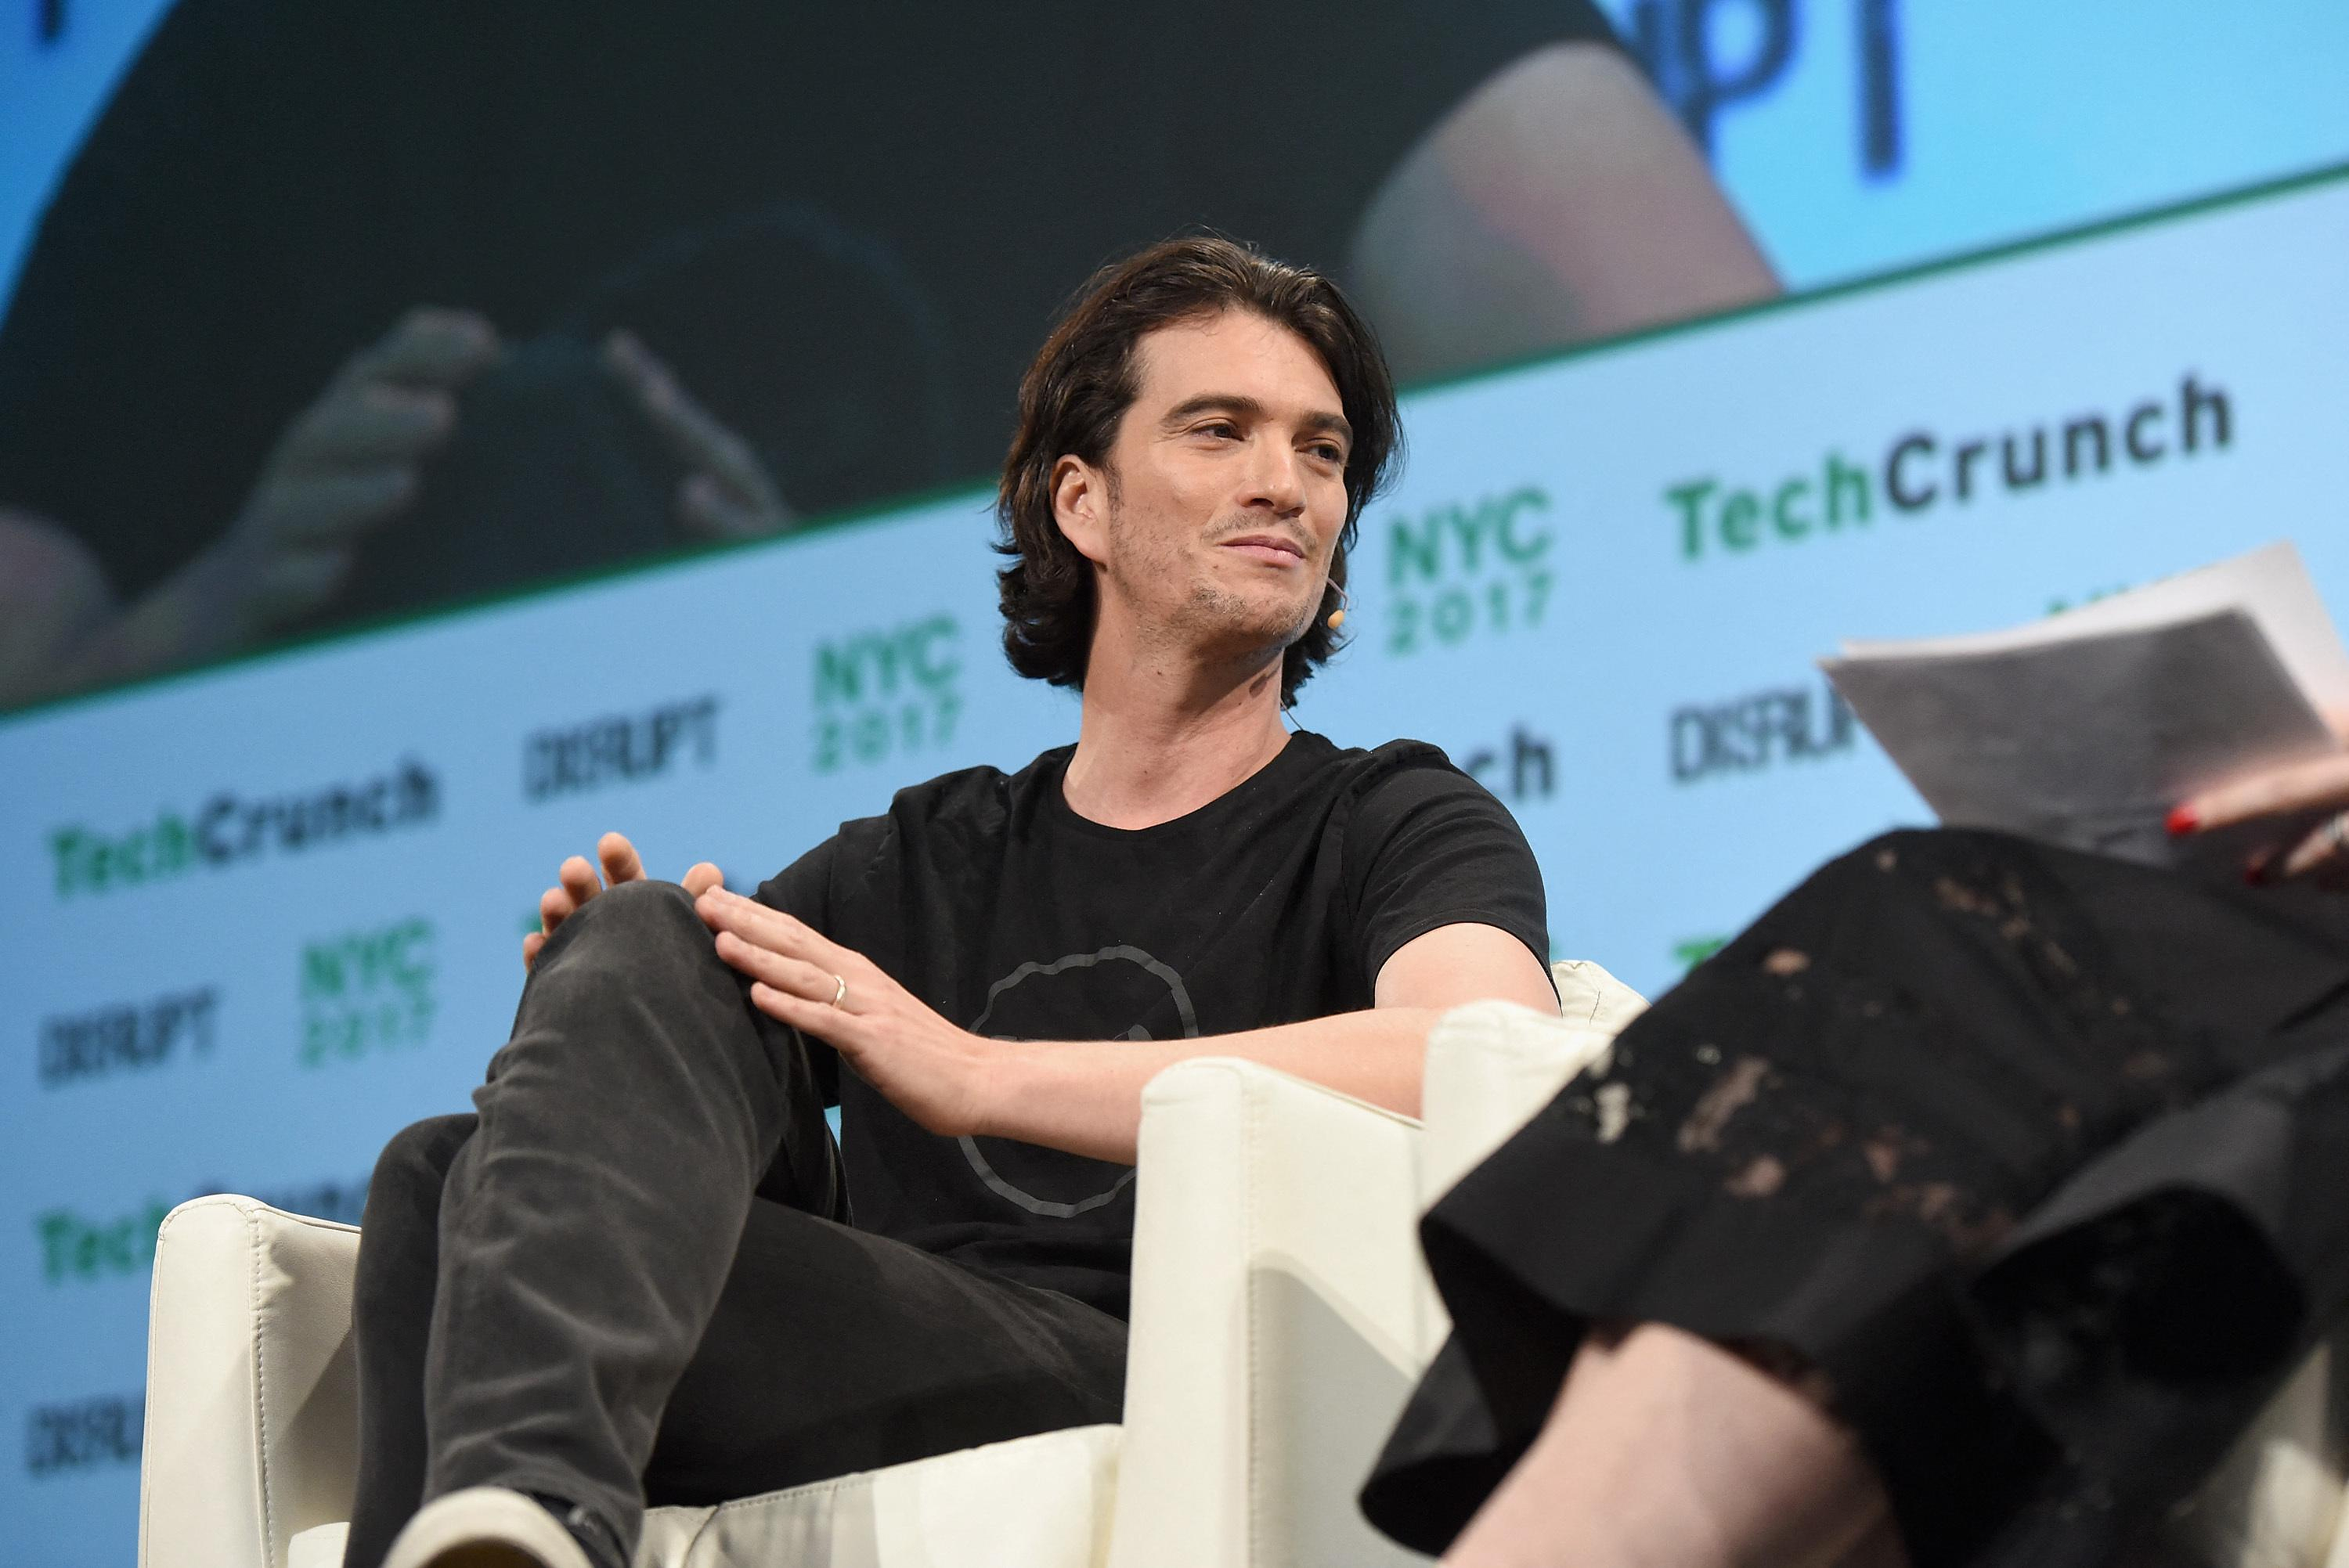 WeWork: start-up founder Adam Neumann tries to buy it cheaply